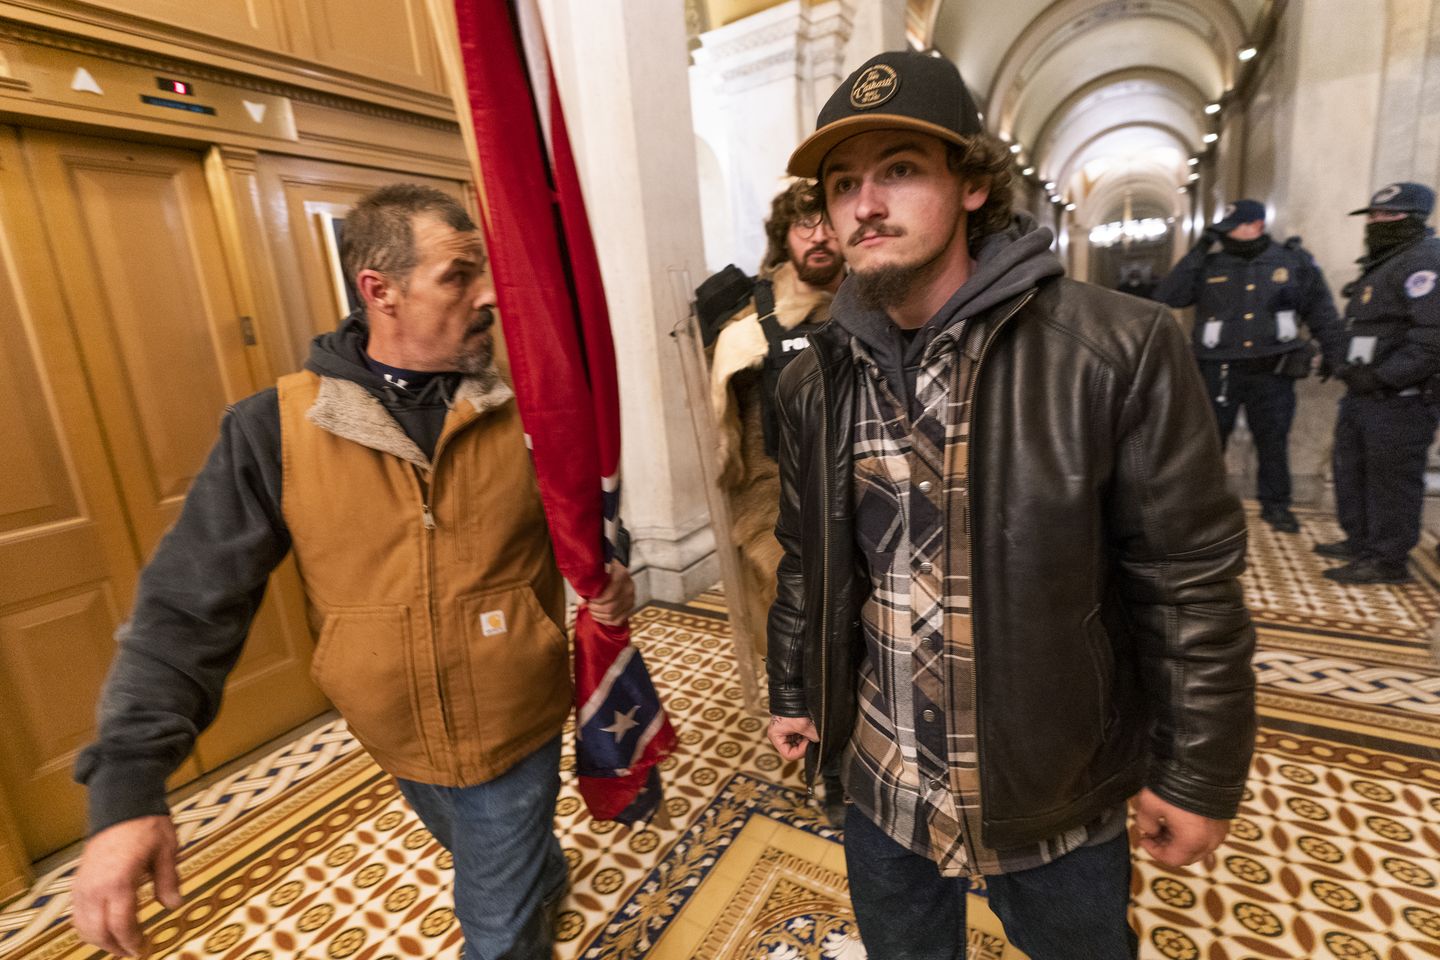 Kevin Seefried, dad who carried Confederate flag into U.S. Capitol, heads to trial